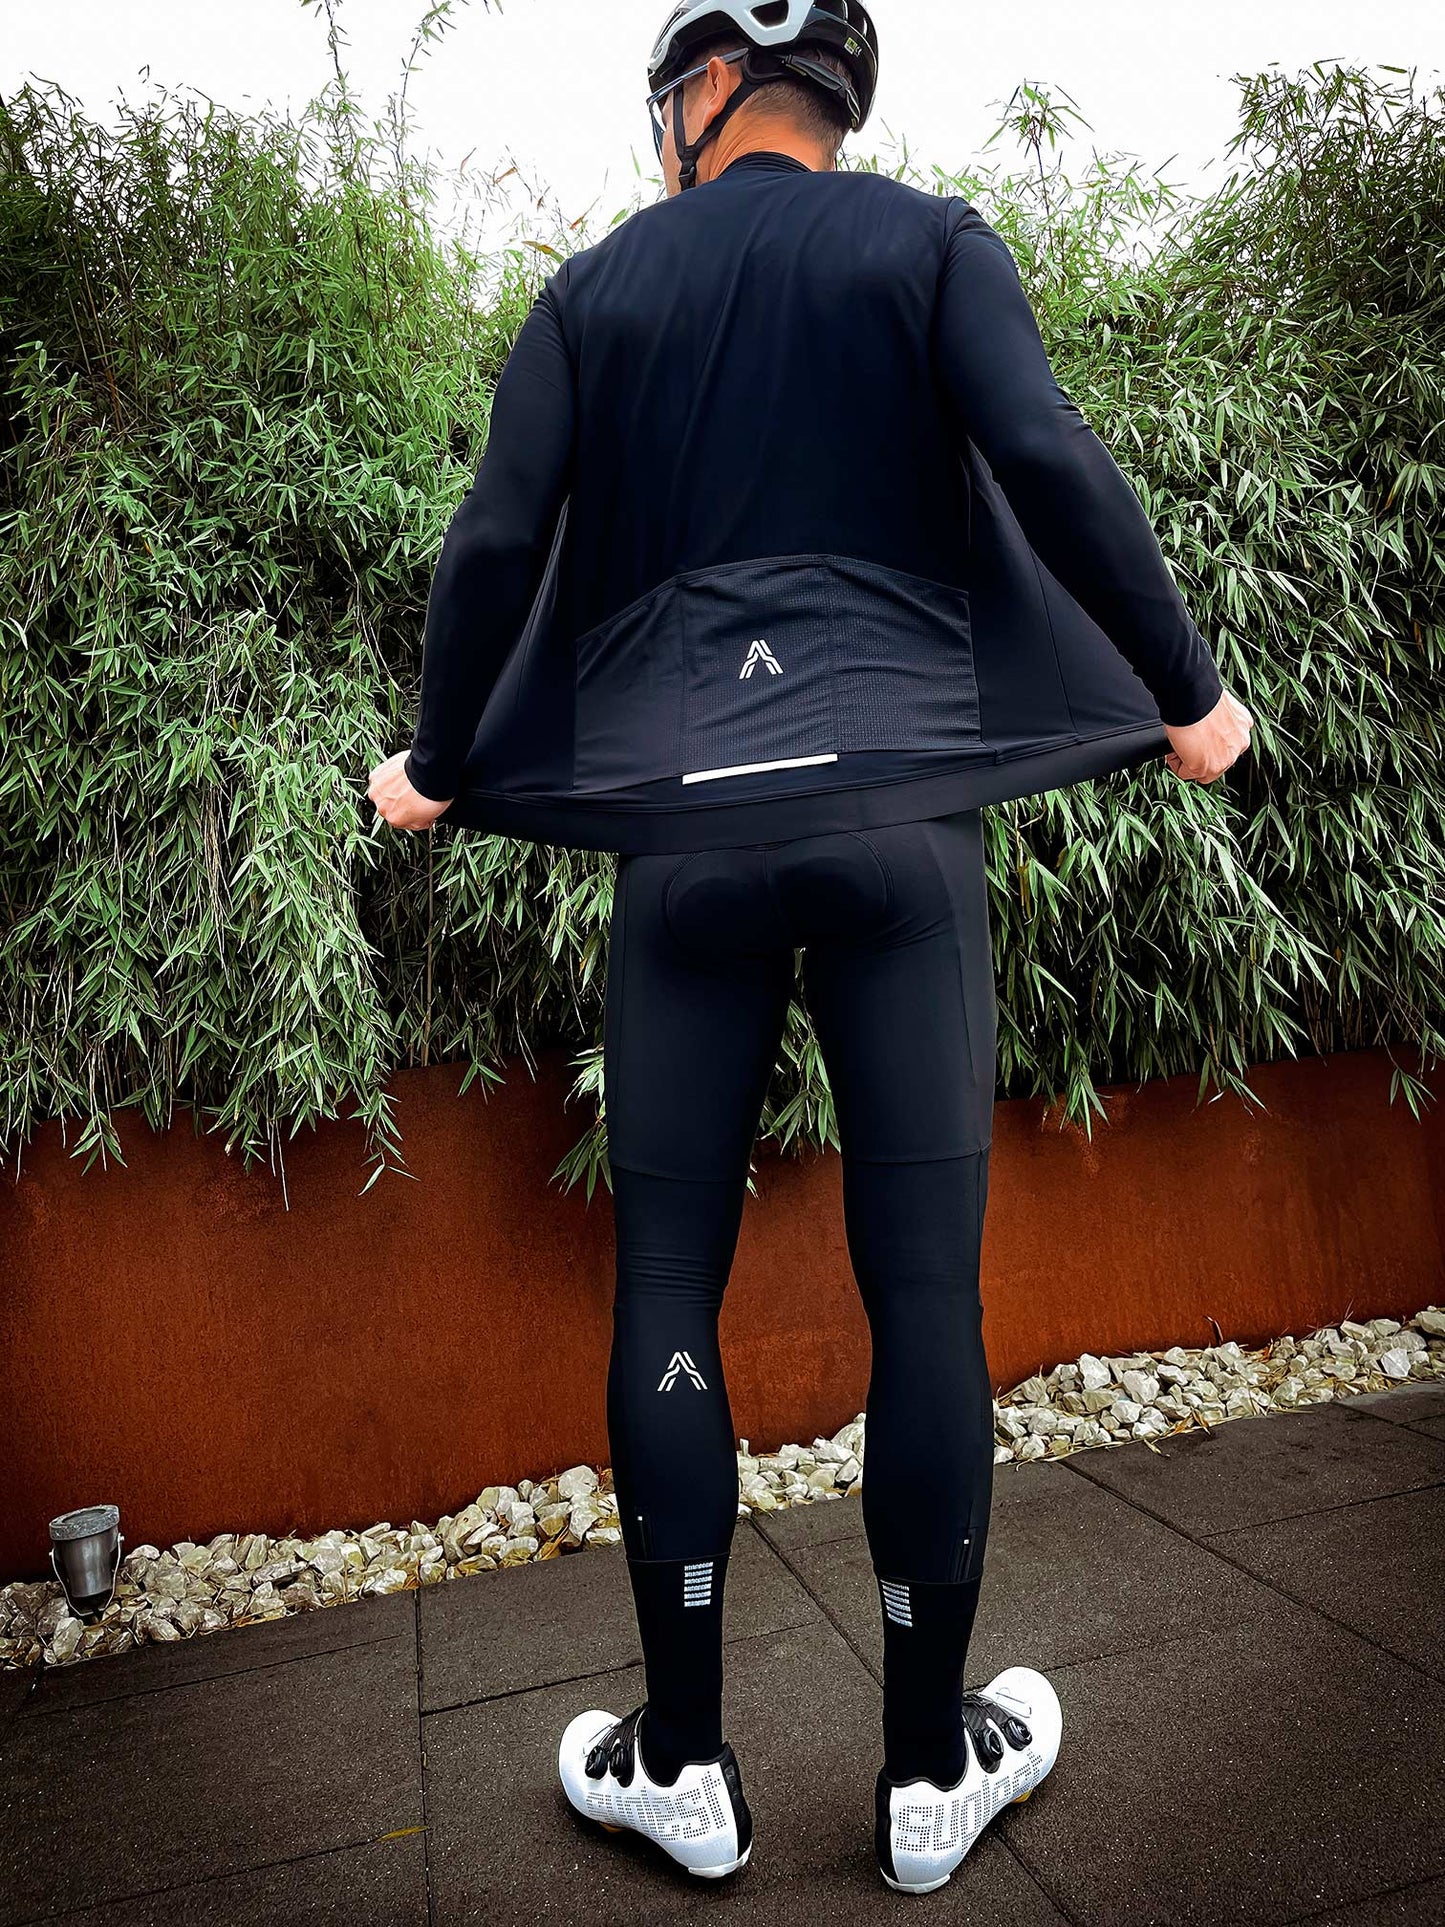 Milano Thermal Long Sleeve Jersey Black from Ascender Cycling Club Zürich Switzerland Backside Live View